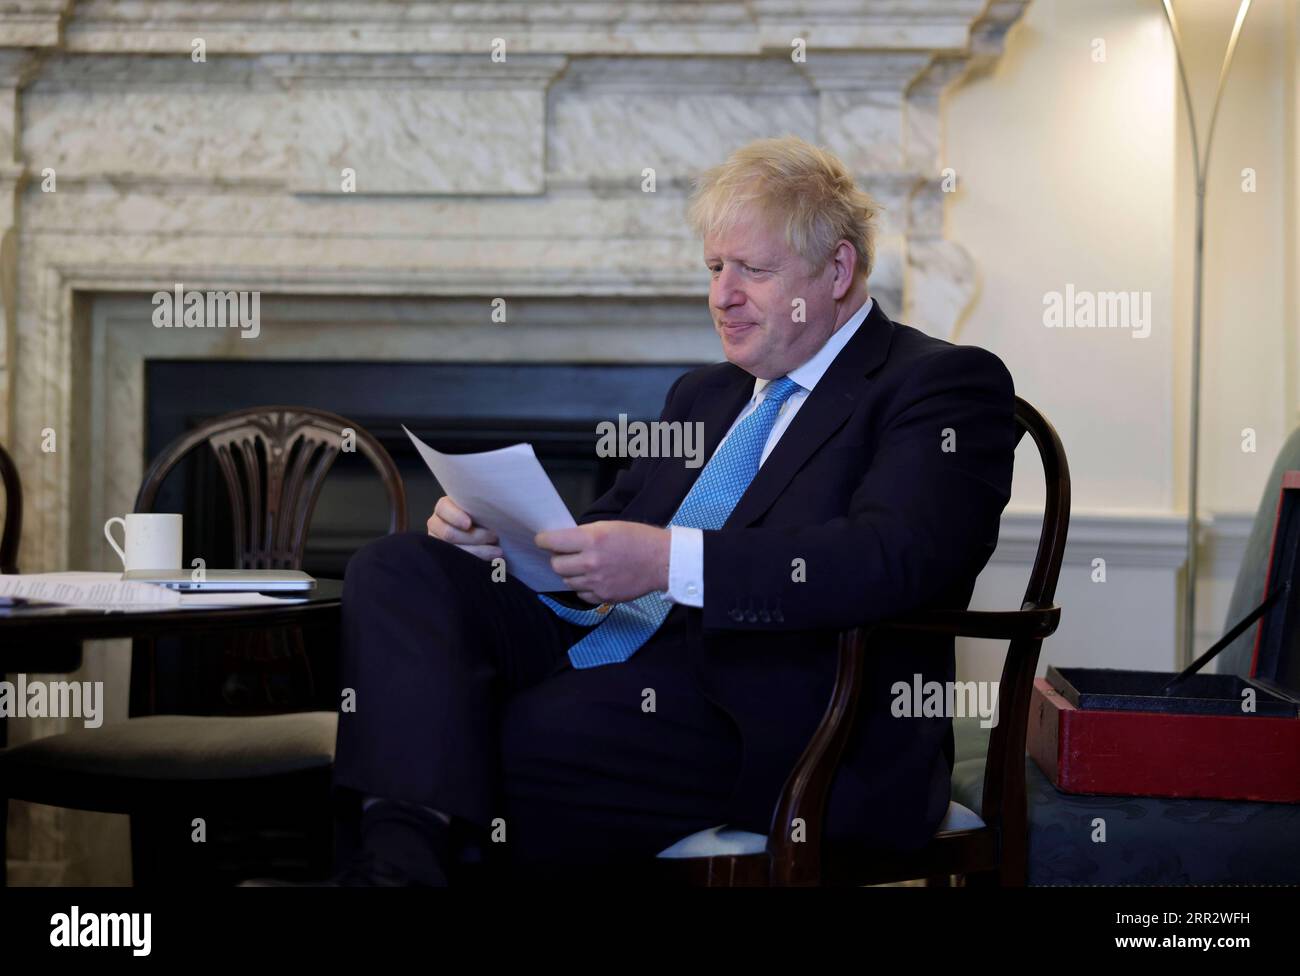 201017 -- LONDON, Oct. 17, 2020 -- British Prime Minister Boris Johnson prepares his Brexit statement in his office at 10 Downing Street, before filming a clip to the media on his reaction after the EU Summit, in London, Britain, on Oct. 16, 2020. Boris Johnson said Friday that as the European Union EU Summit in Brussels refused to offer London a Canada-style deal, Britain will prepare to embrace a no-trade deal scenario. Johnson made the response following the EU Summit discussions on Brexit Thursday. EU s chief Brexit negotiator Michel Barnier said he will continue intensive talks in the com Stock Photo